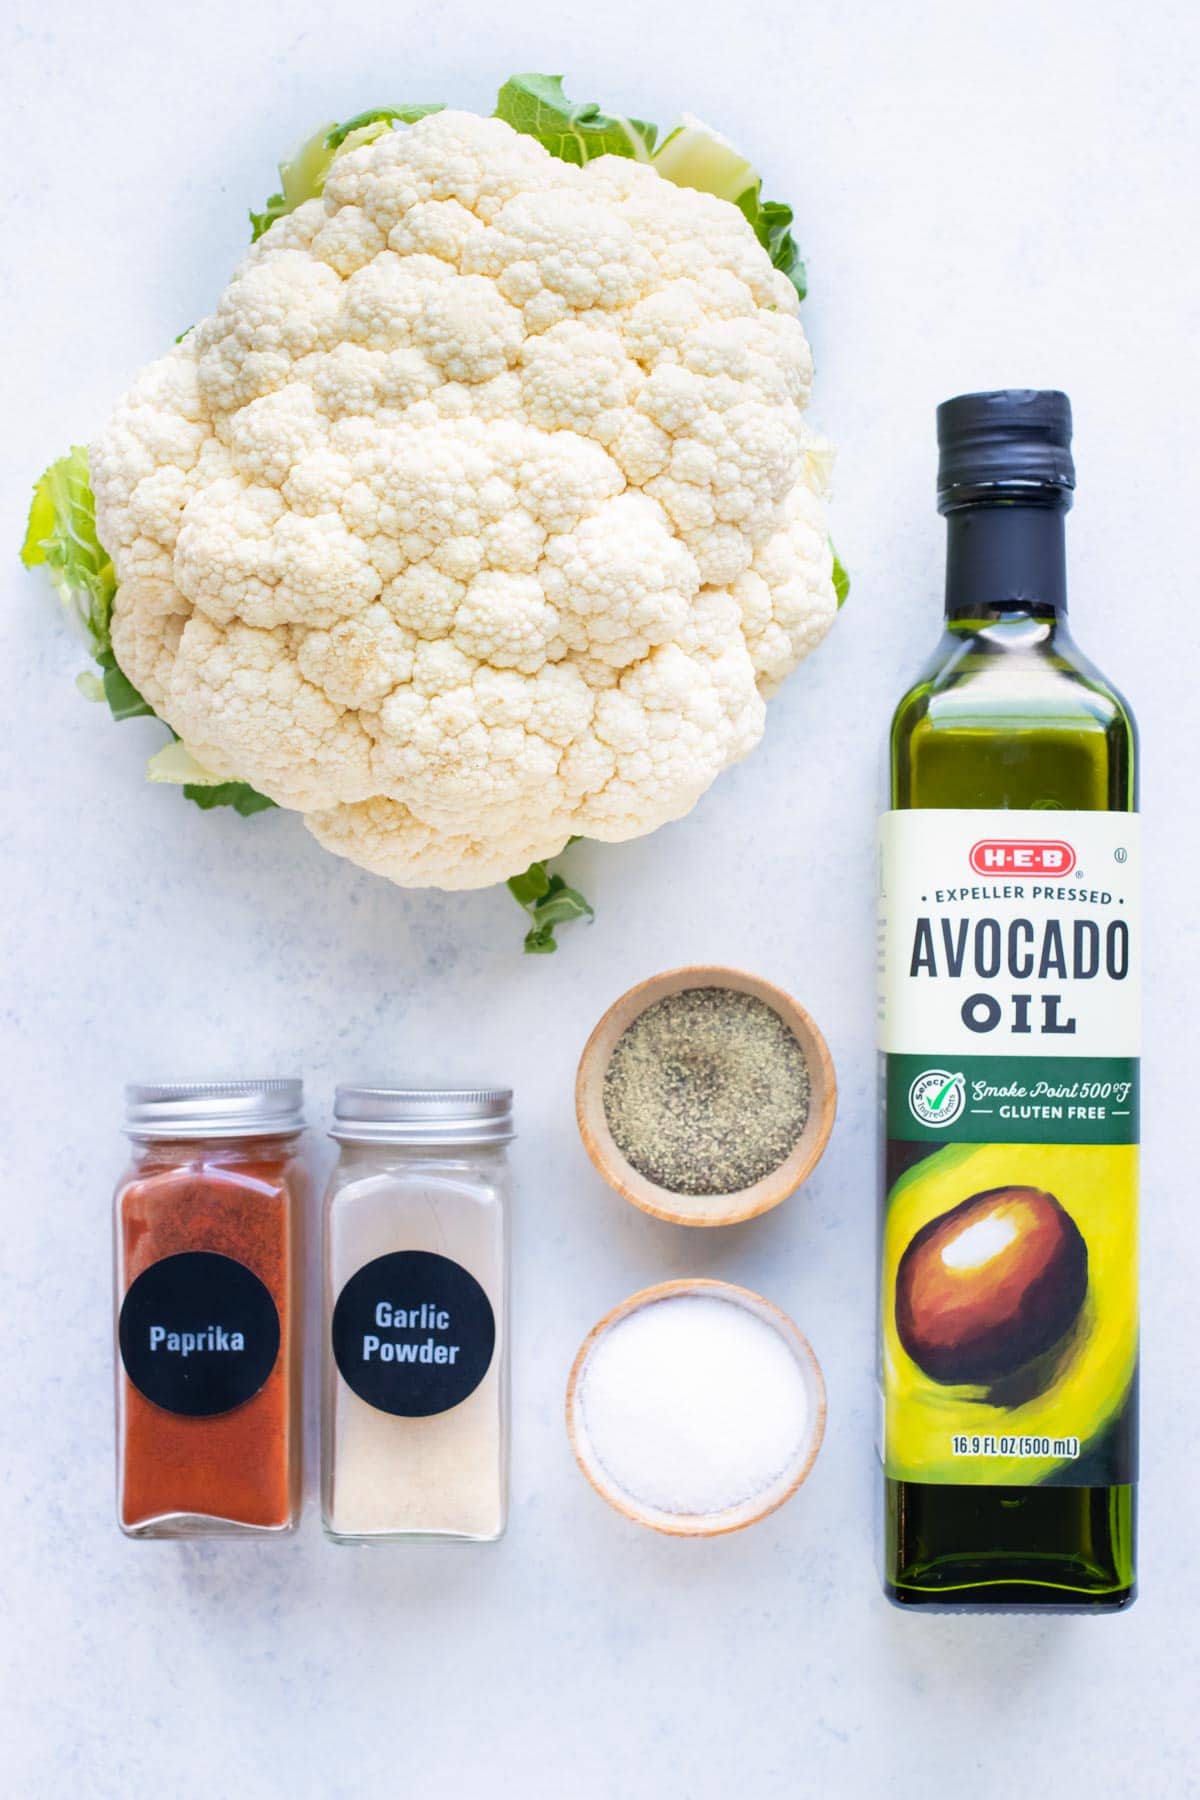 Avocado oil, cauliflower, and seasonings are the ingredients needed for this air fryer cauliflower recipe.